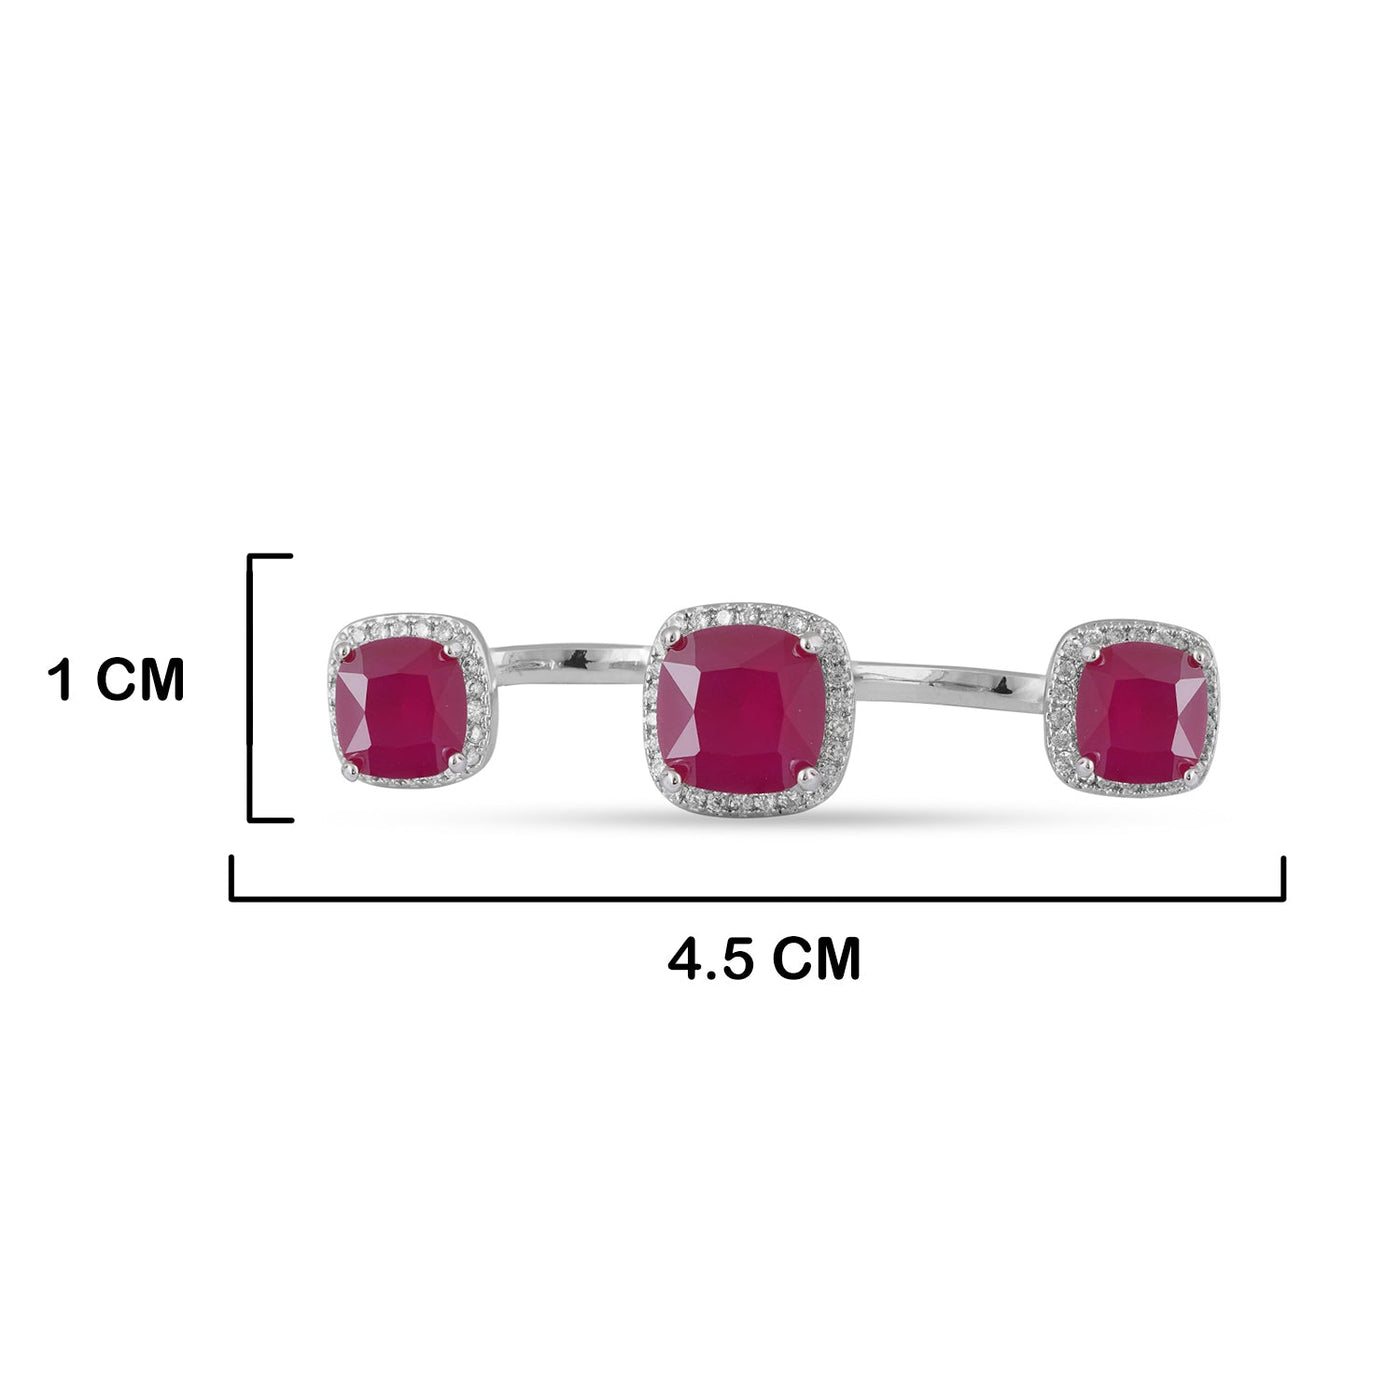 Ruby Red Cubic Zirconia Ring with measurements in cm. 1cm by 4.5cm.